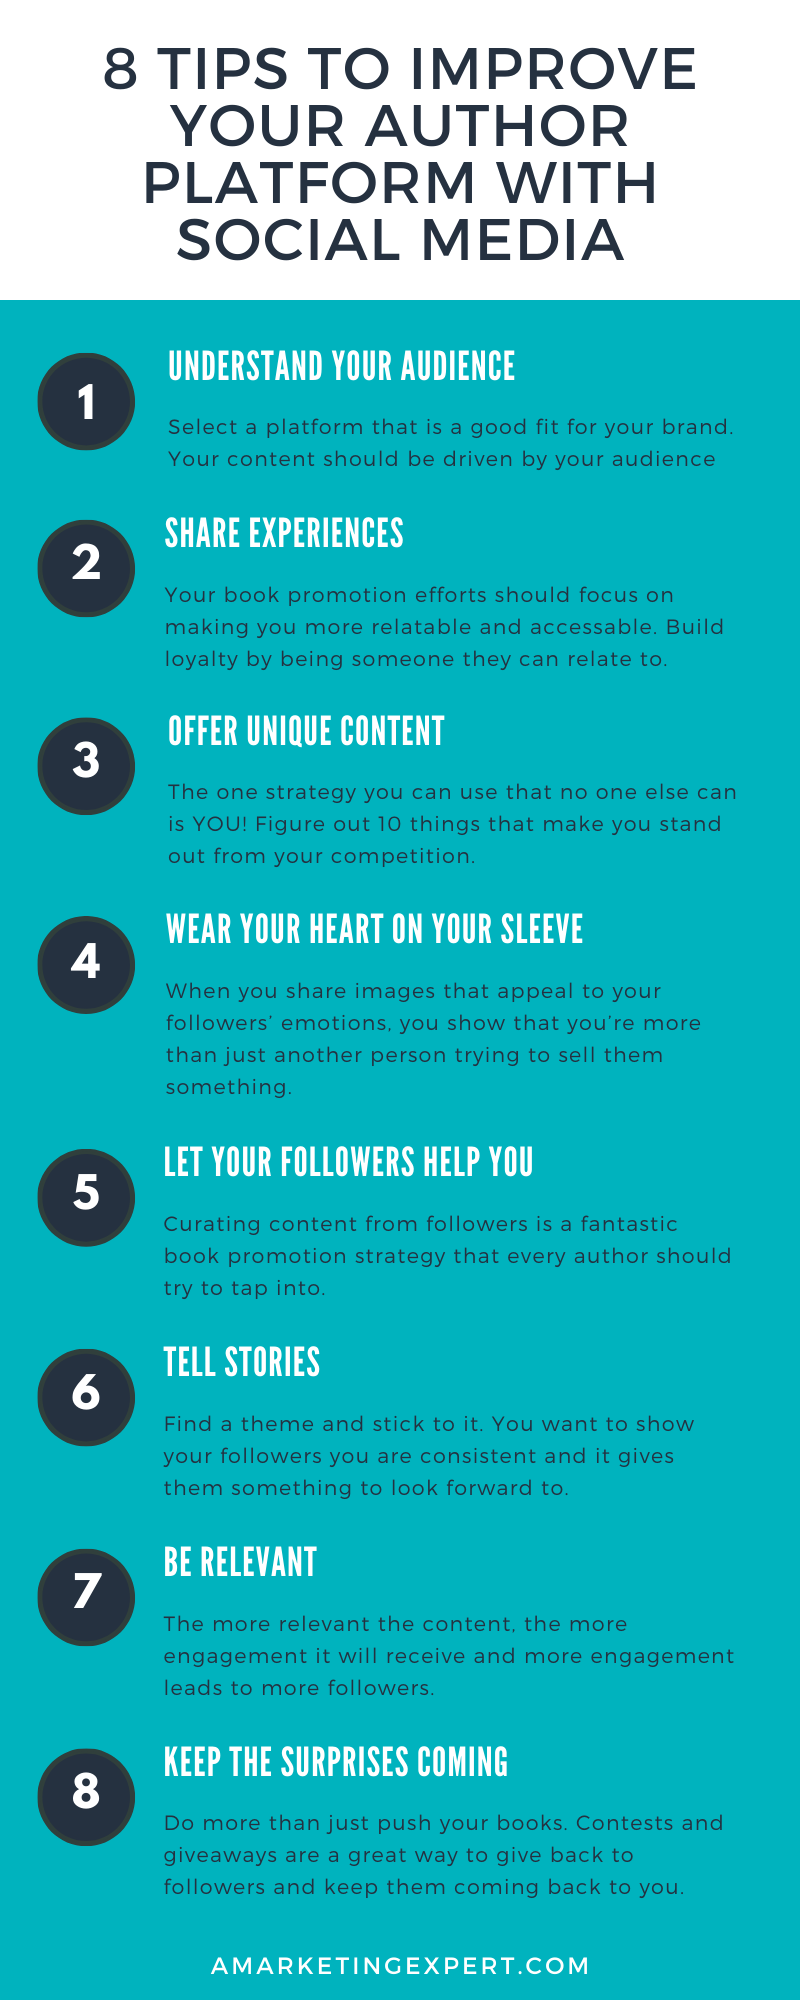 8-tips-to-improve-your-author-platform-with-social-media-infographic